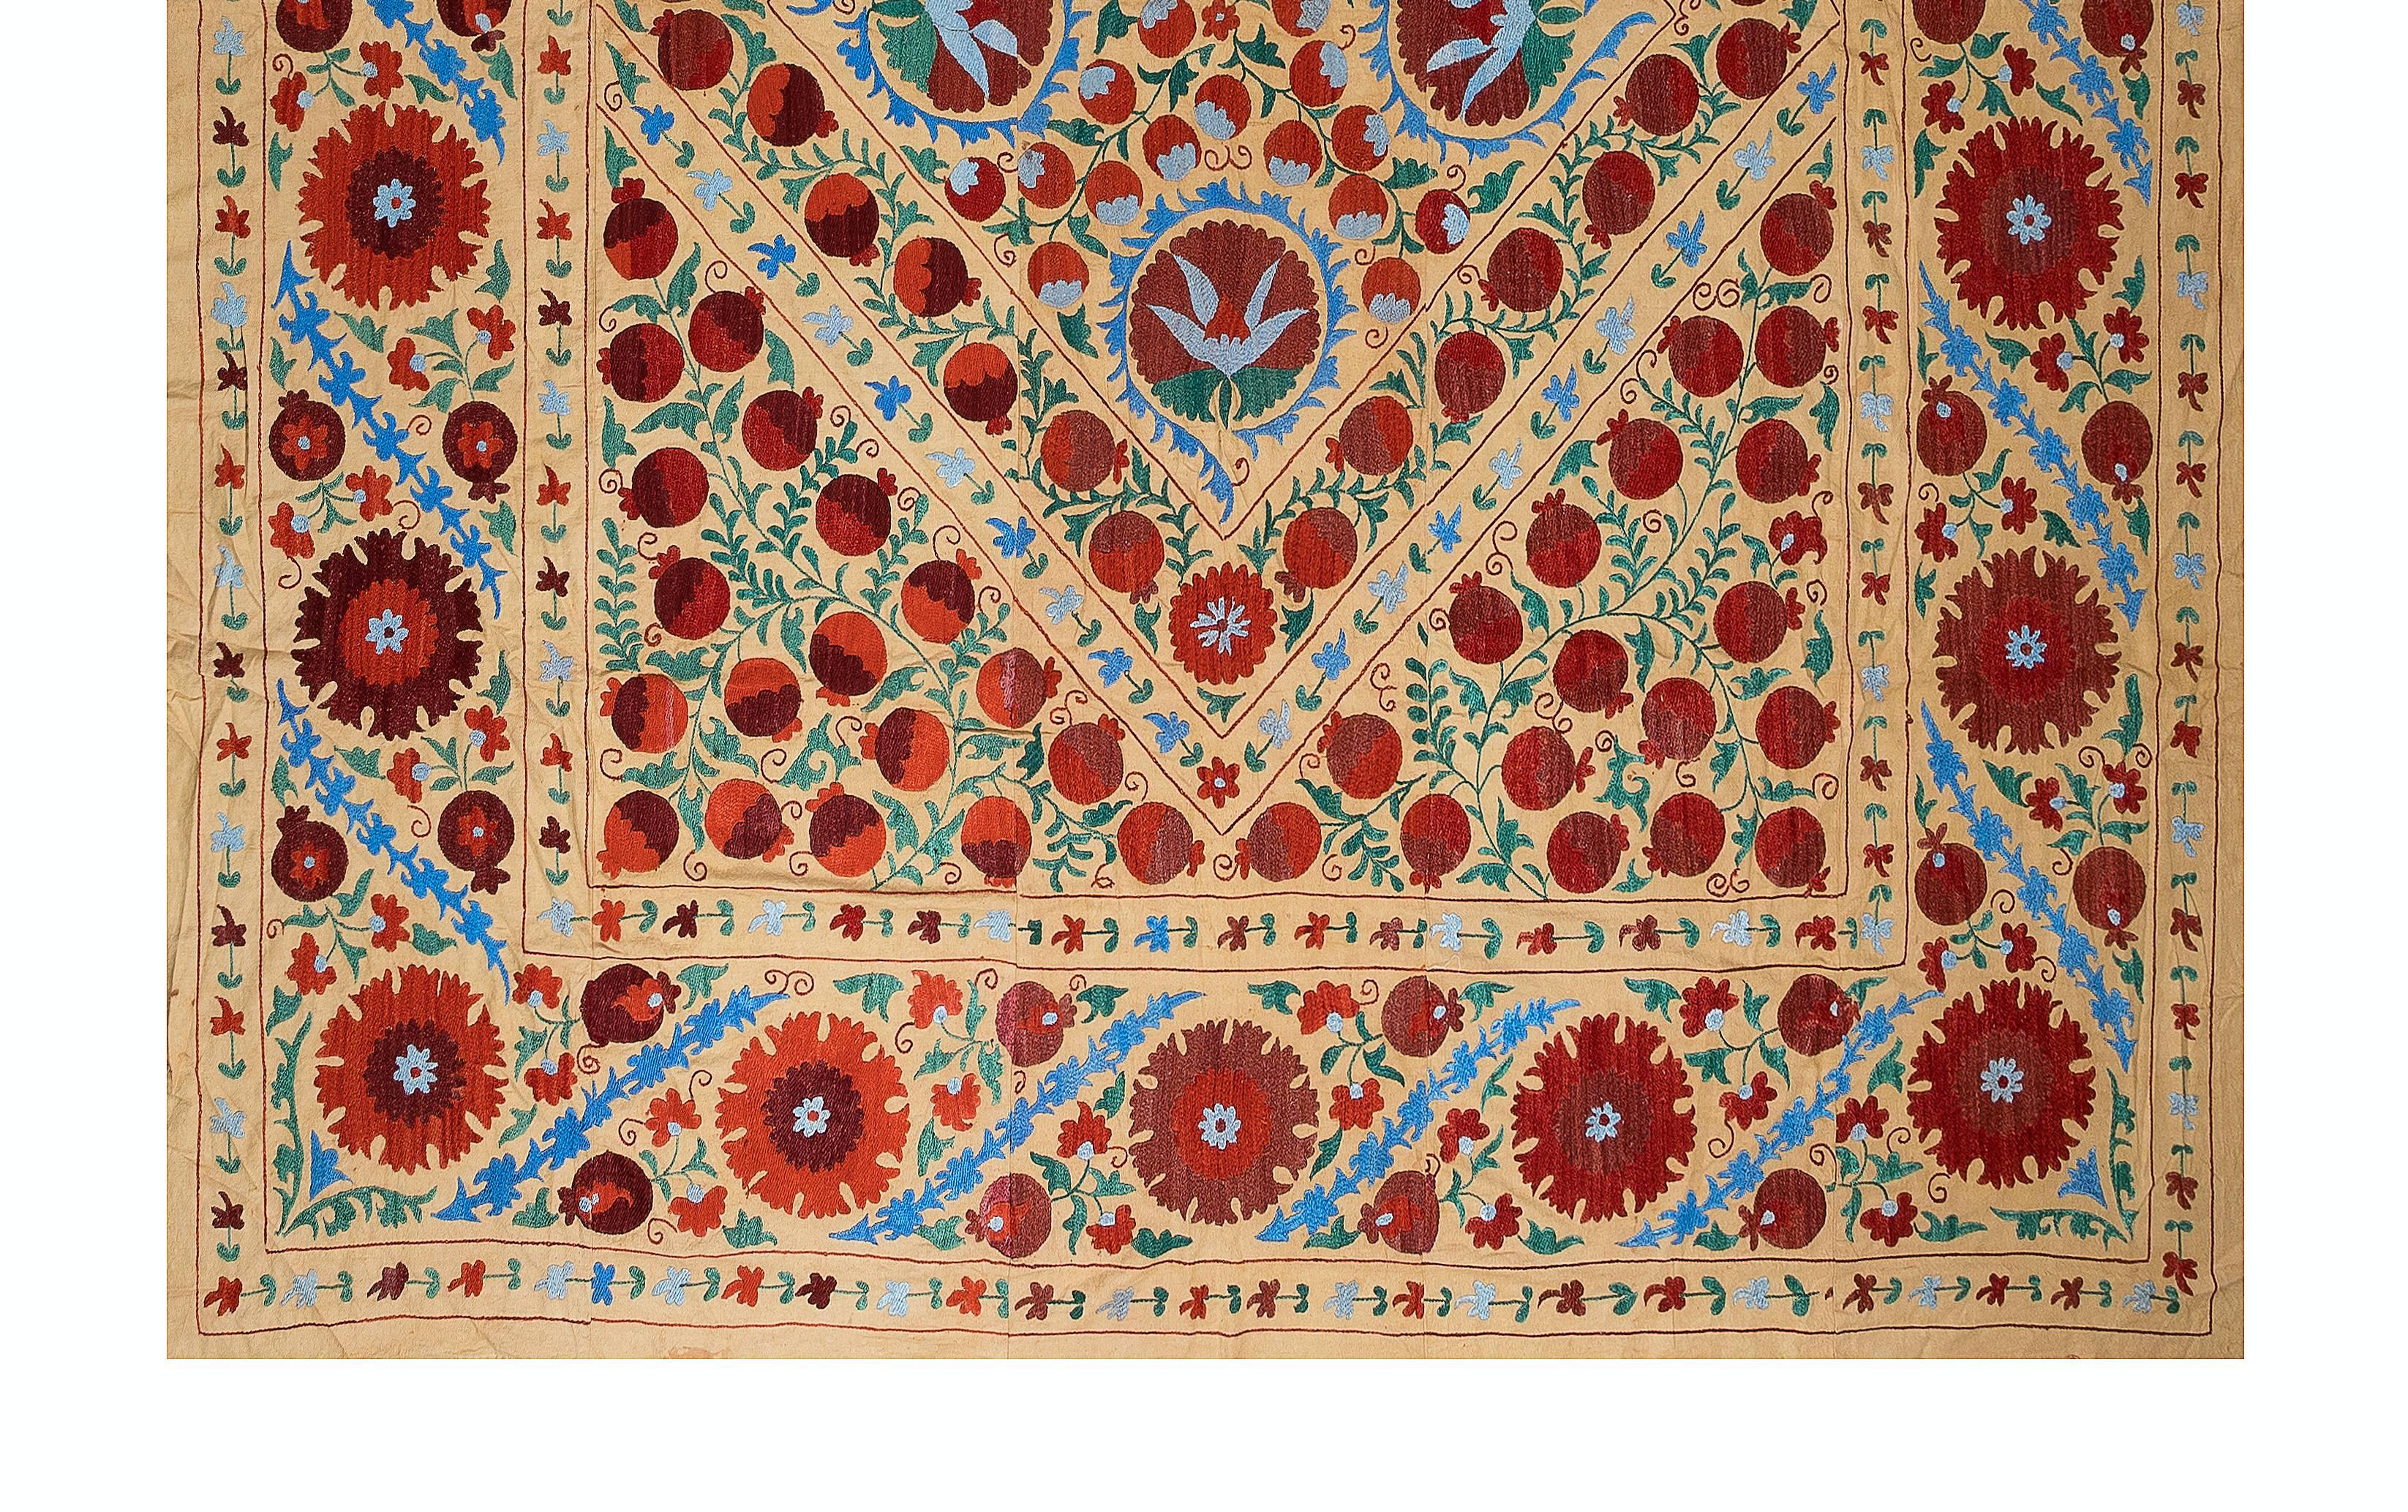 Embroidered 7.9x8.4 Ft Suzani Silk Embroidery Bed Cover, Home Decor Vintage Uzbek Throw For Sale